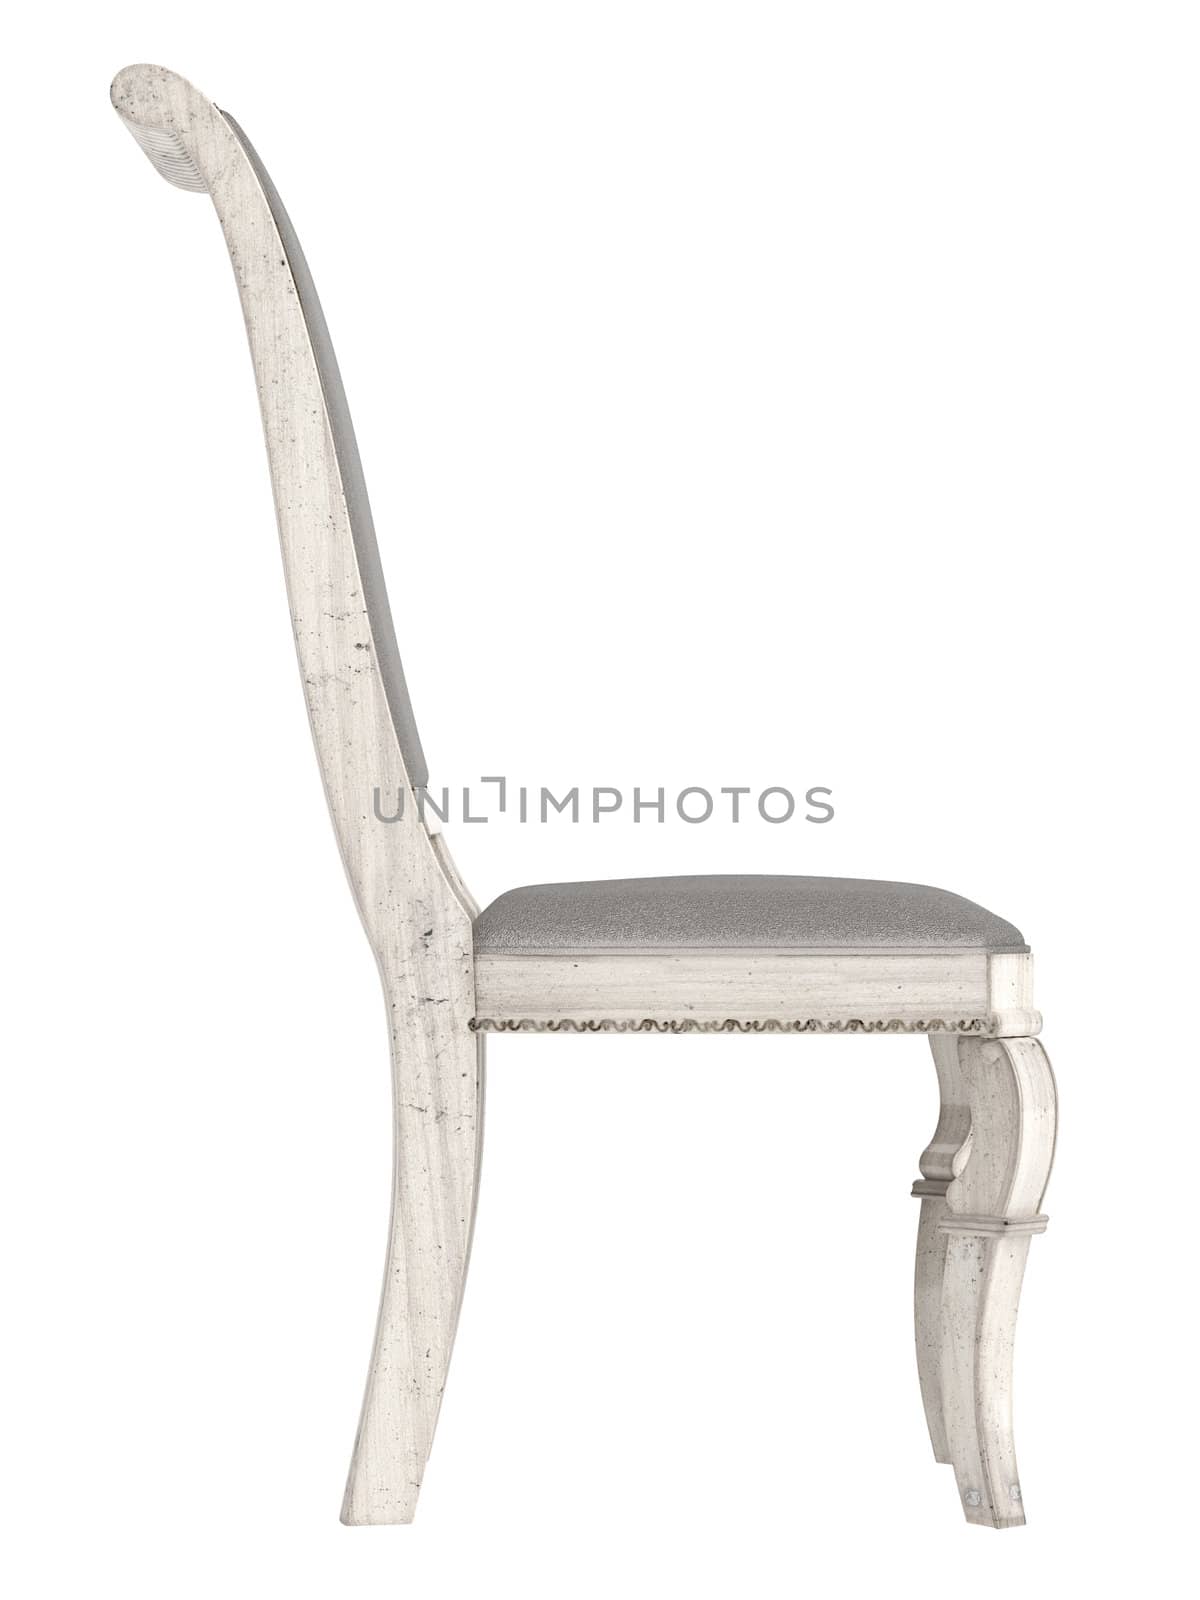 Antique wooden chair isolated on white background